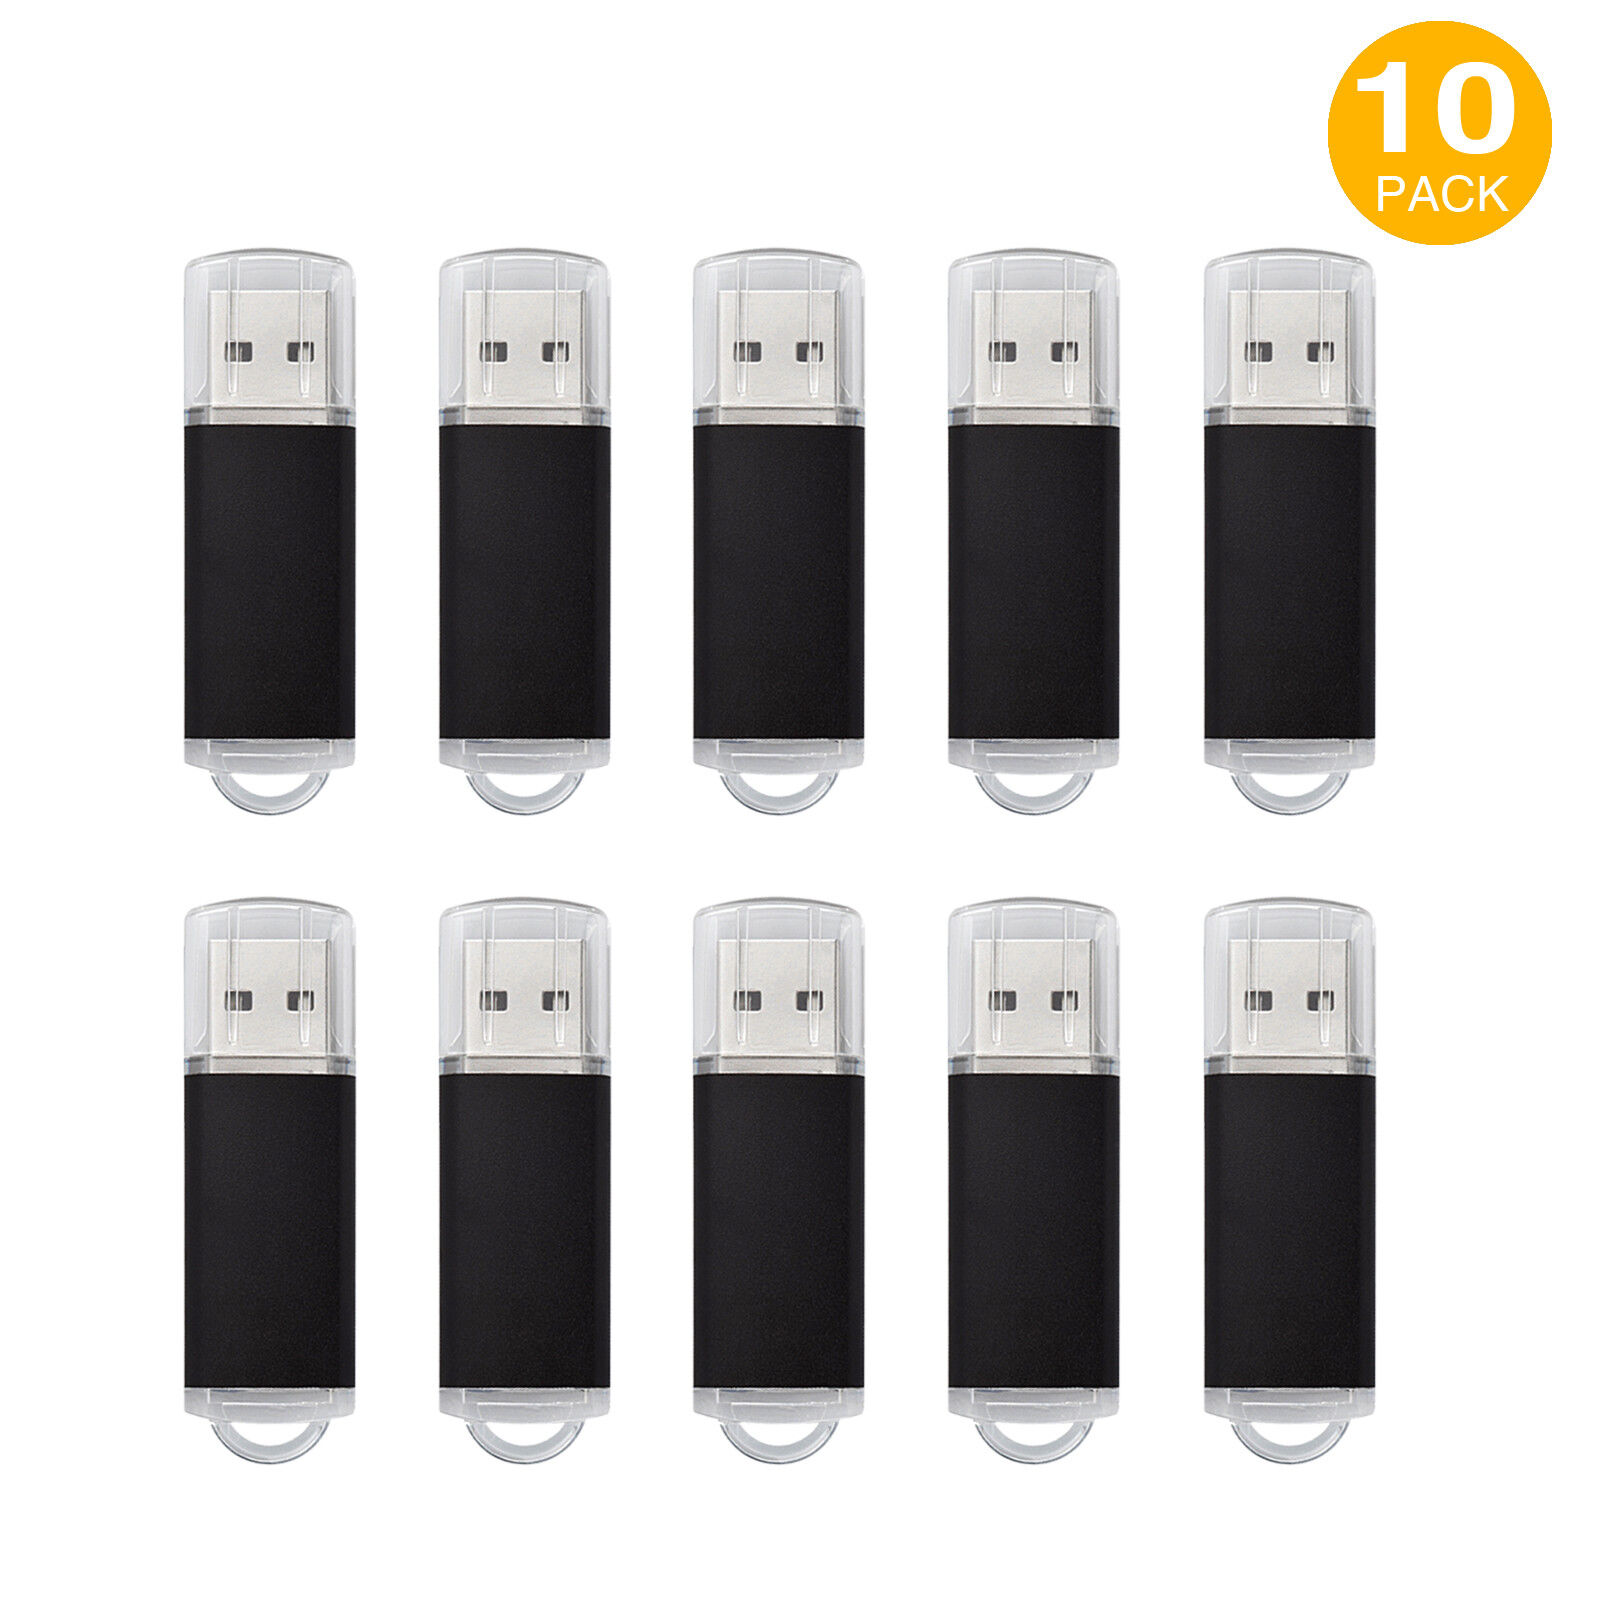 10 Pack 16GB USB Flash Drive Free shipping anywhere in the nation Memory Model Rectangle Stick Jacksonville Mall